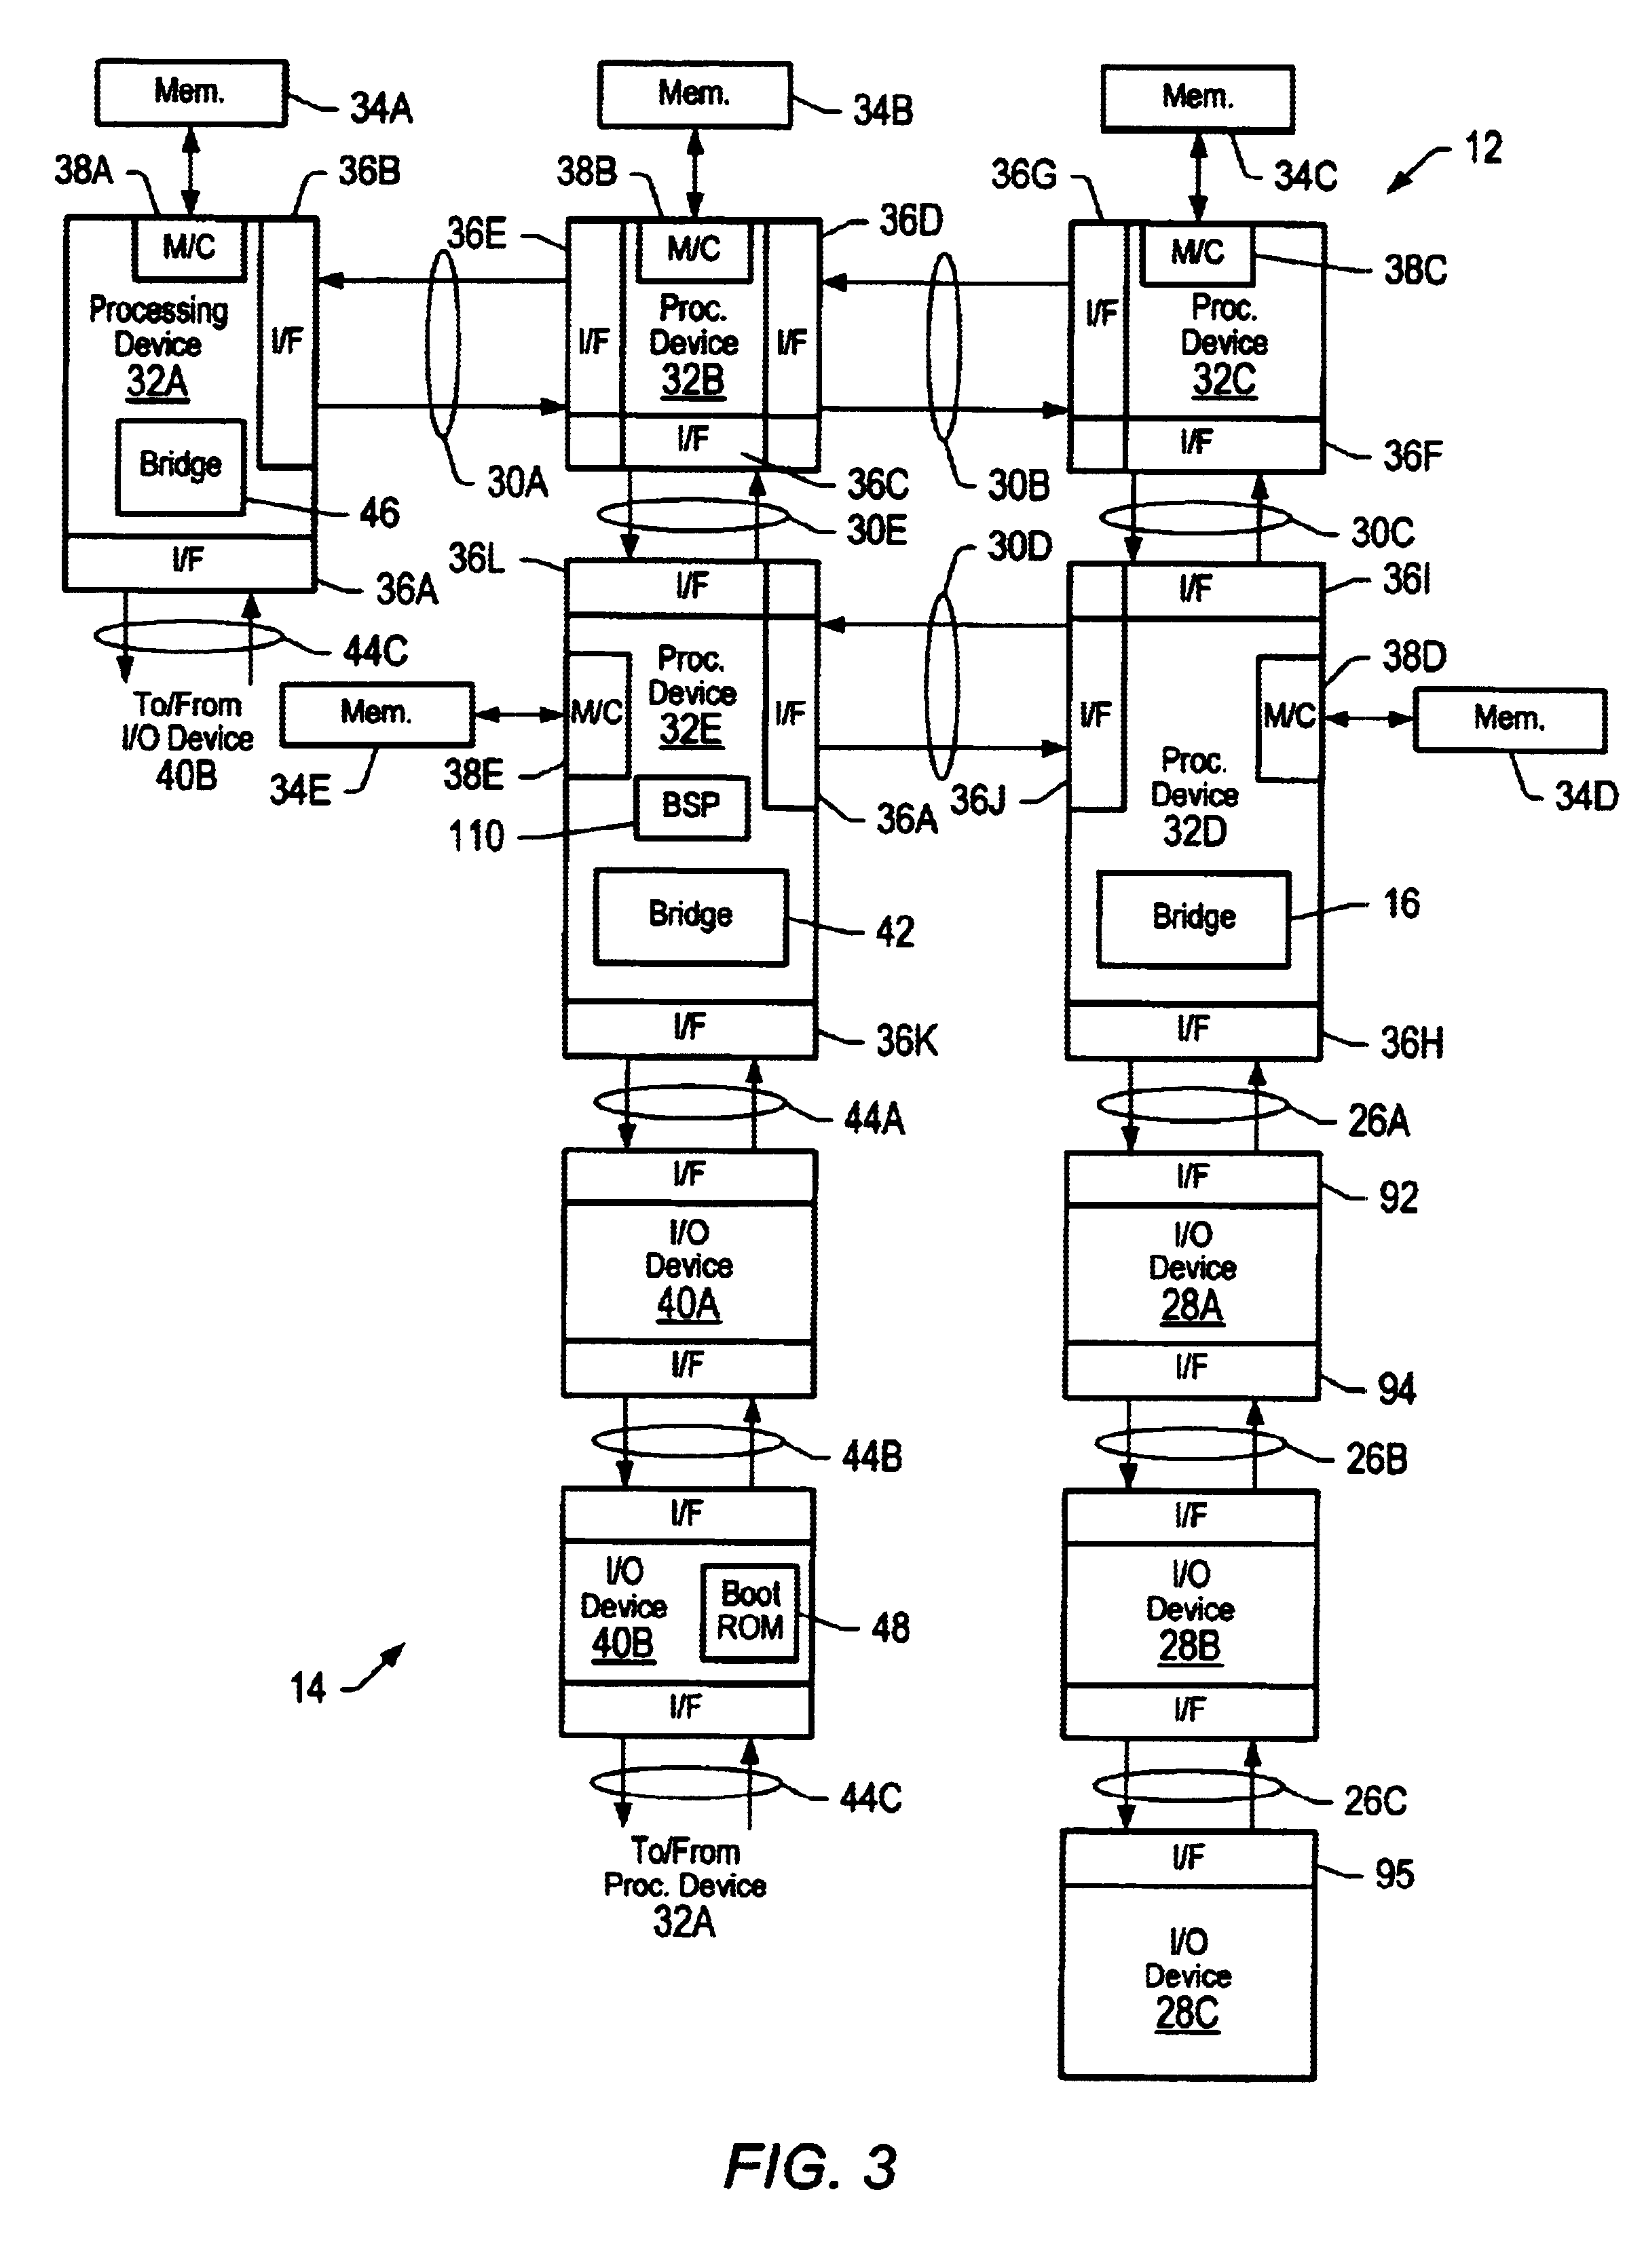 System for reconfiguring a first device and/or a second device to use a maximum compatible communication parameters based on transmitting a communication to the first and second devices of a point-to-point link